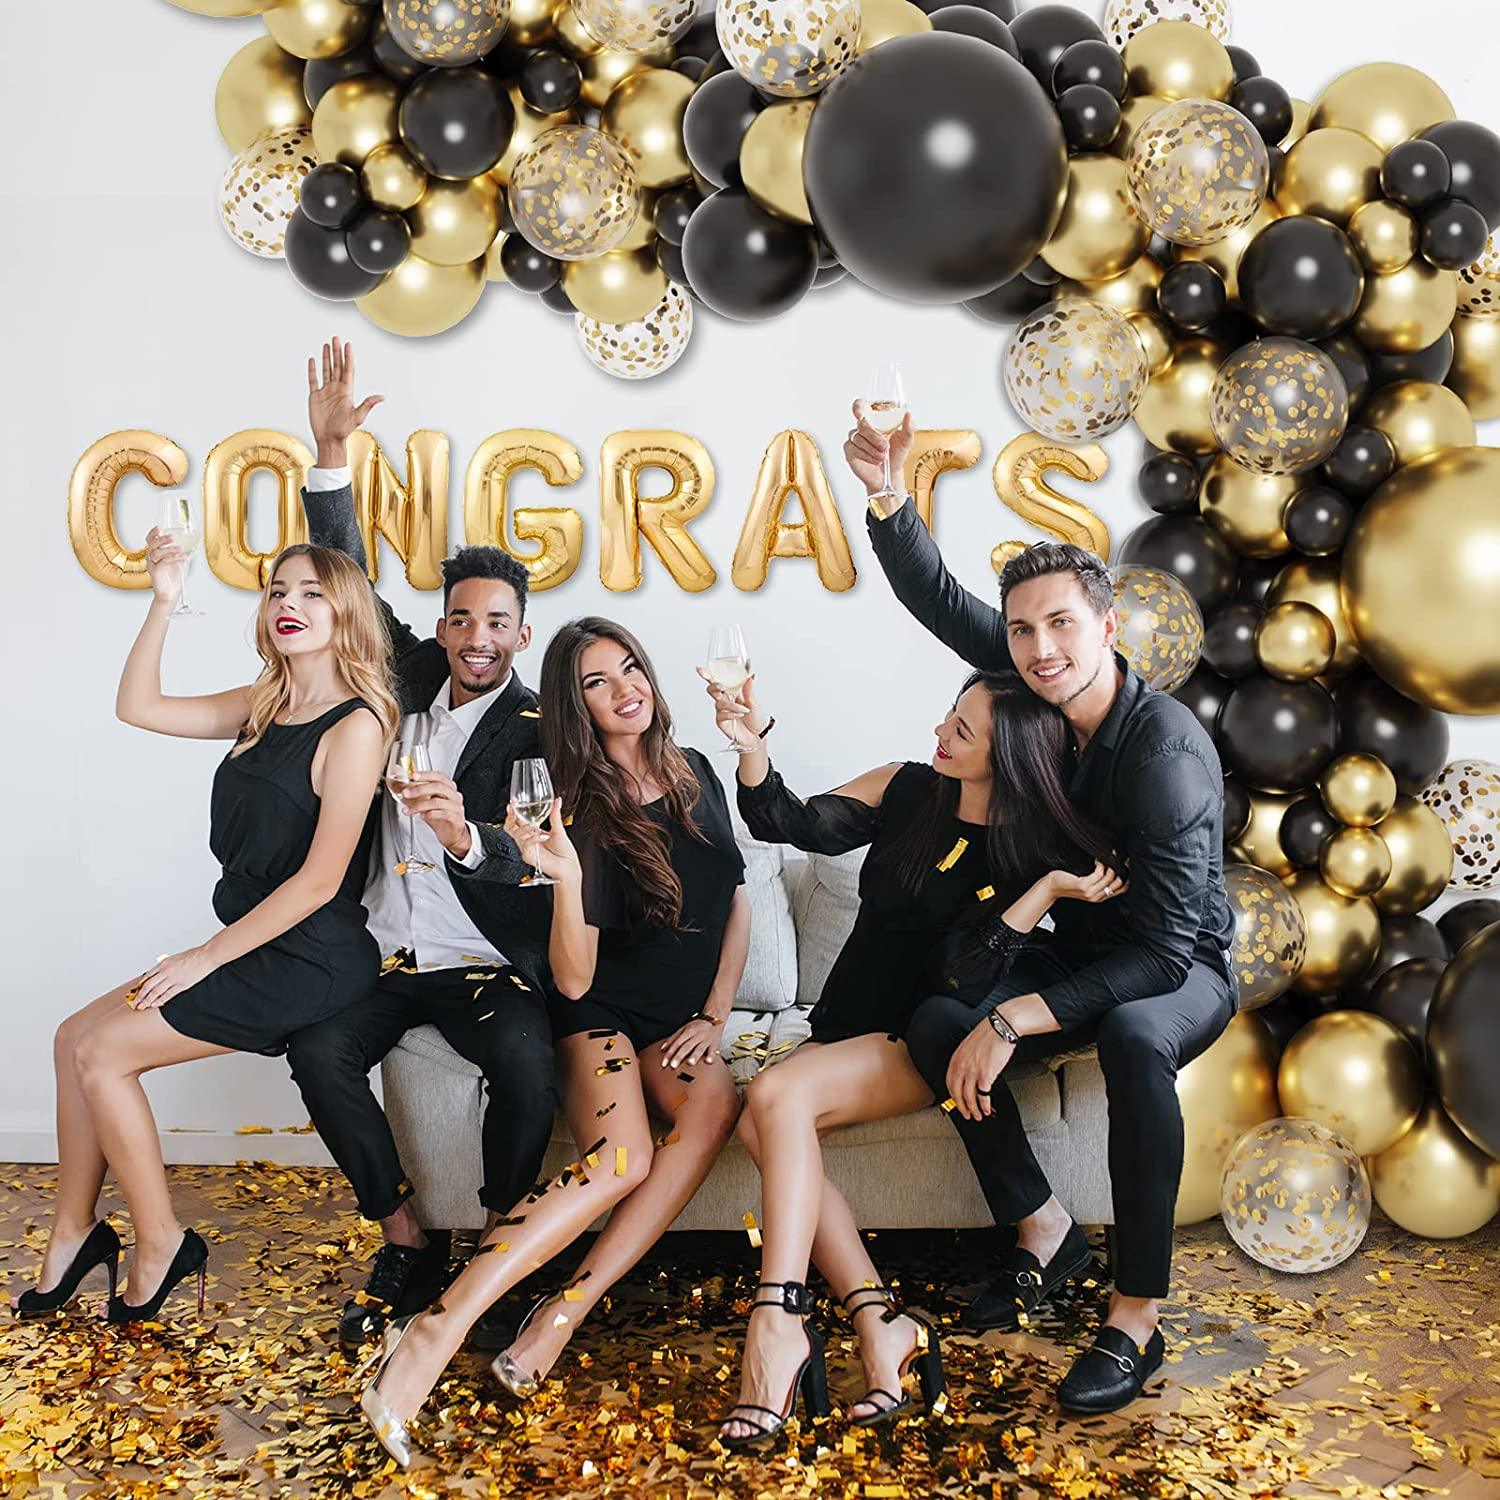 133pcs Black and Gold Balloons Garland Arch Kit, Black Metal Gold and Metallic Confetti Gold Balloons for Graduation - If you say i do